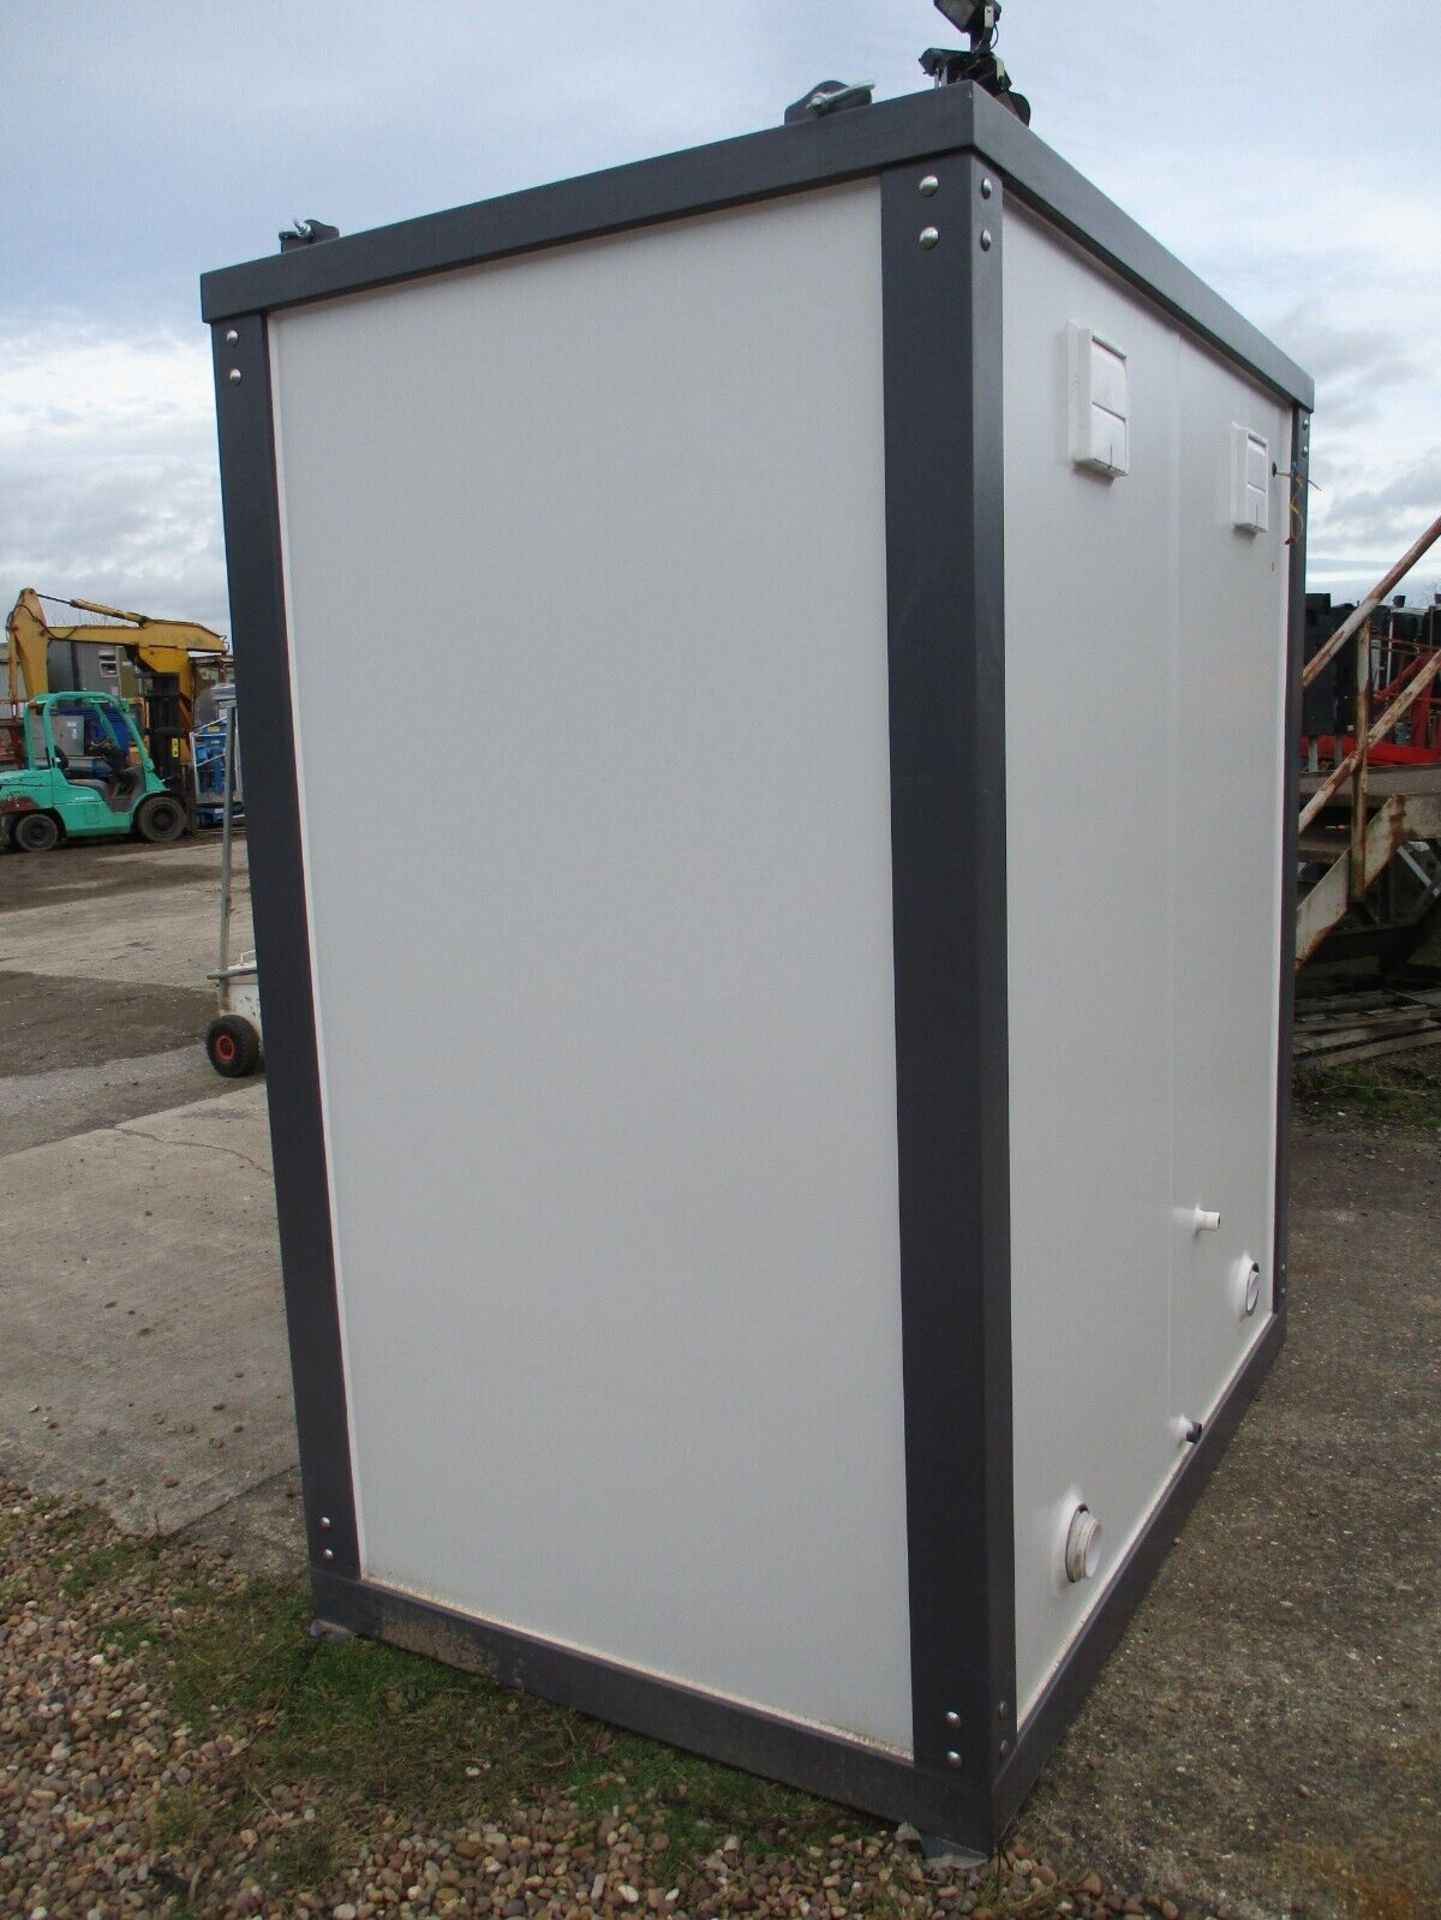 COMPACT COMFORT: 2.15M X 1.3M SHIPPING CONTAINER TOILET OASIS - Image 6 of 9